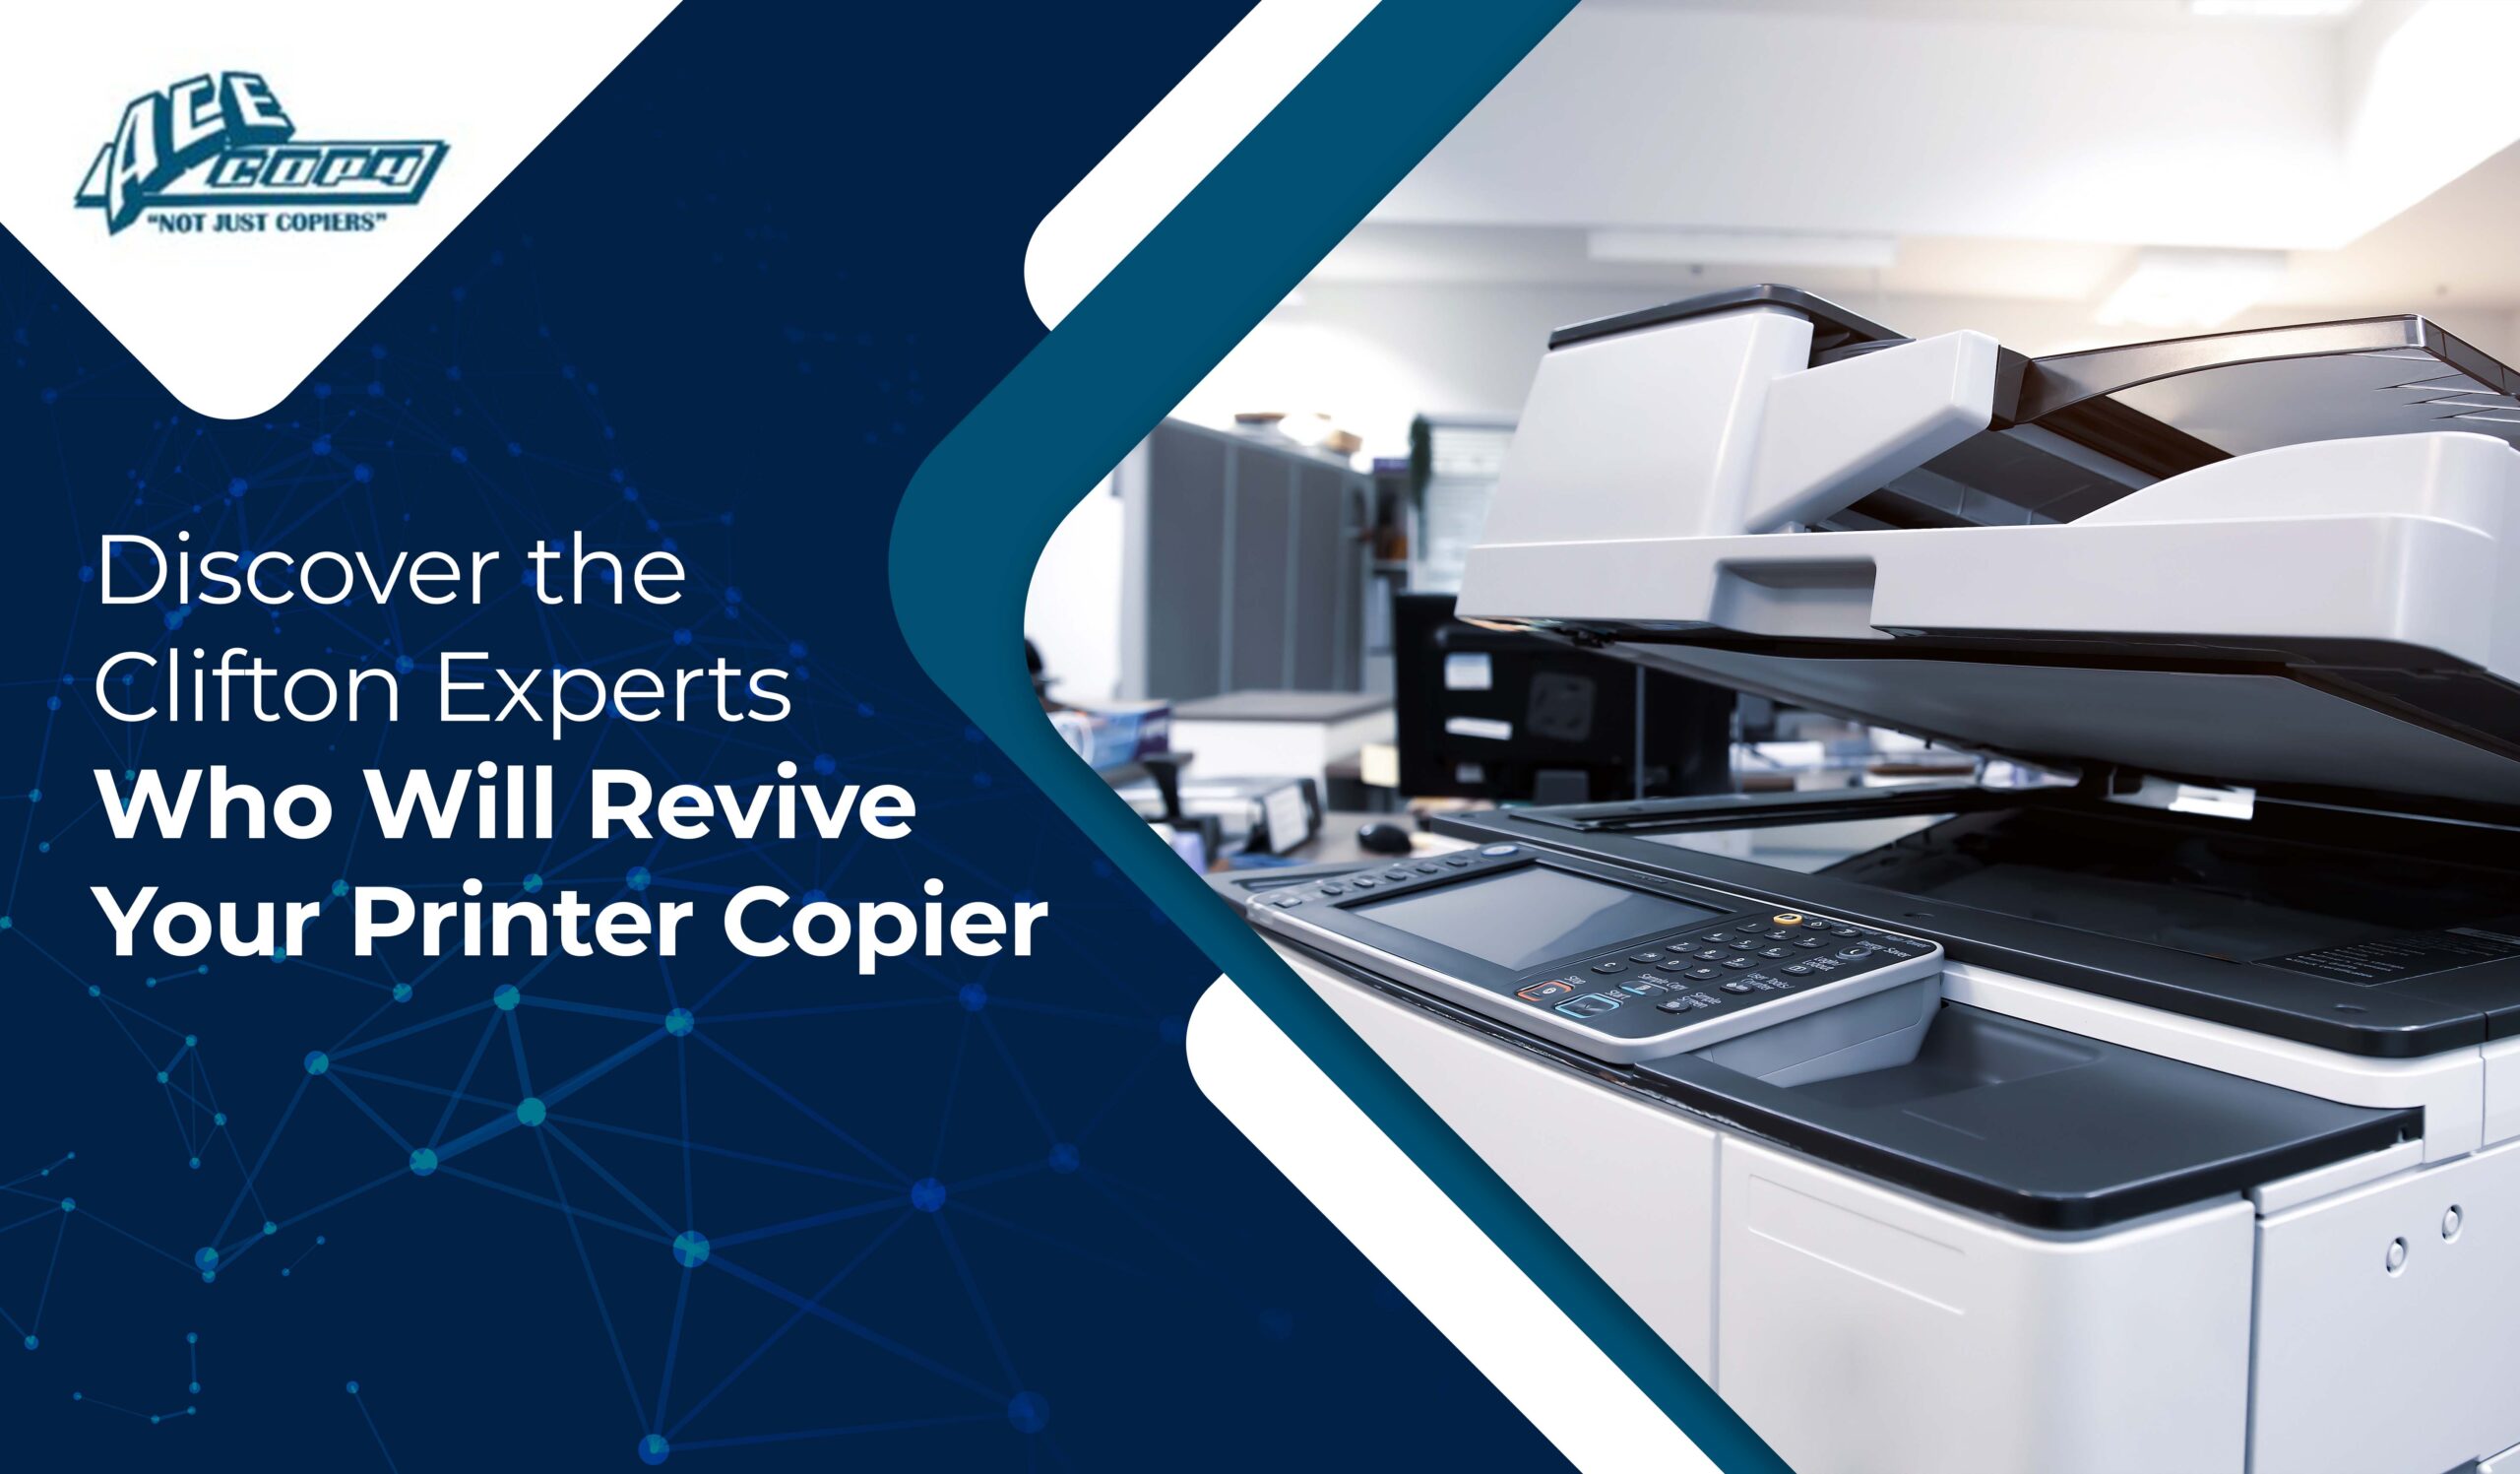 Discover the Clifton Experts Who Will Revive Your Printer Copier